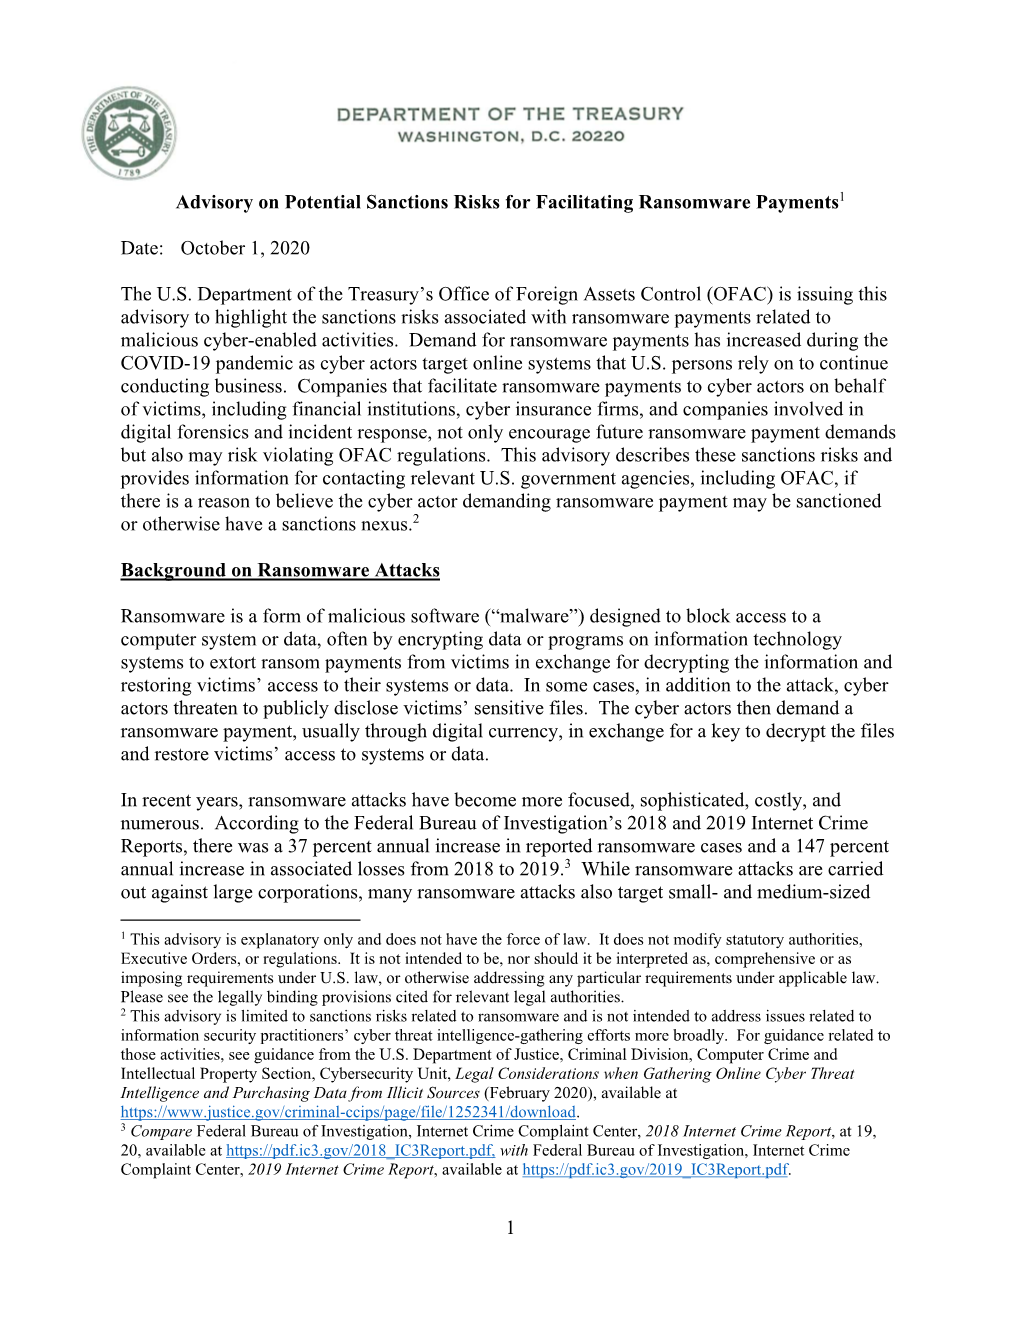 OFAC Advisory on Potential Sanctions Risks for Facilitating Ransomware